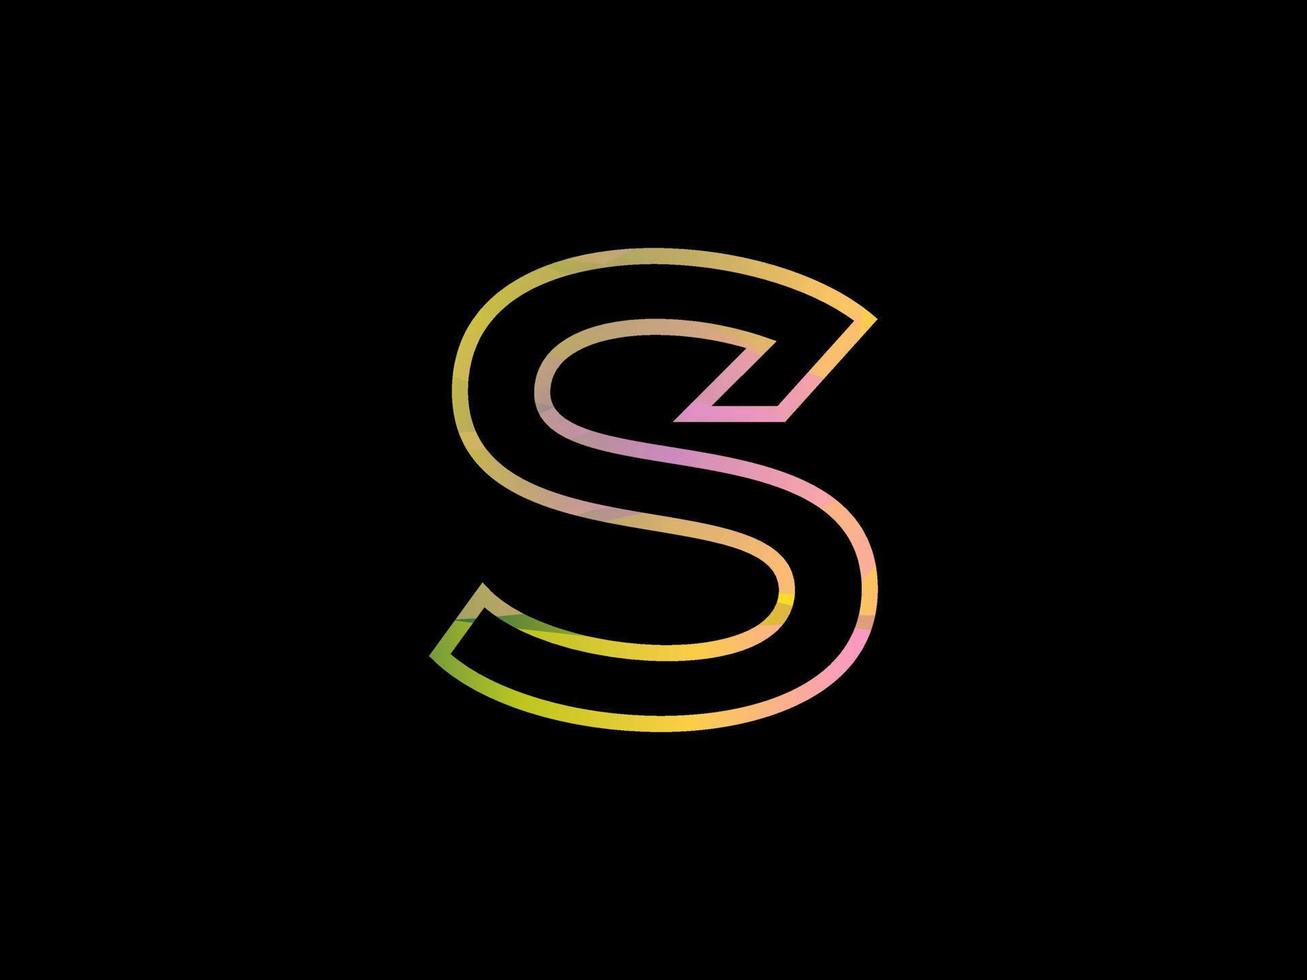 S Letter Logo With Colorful Rainbow Texture Vector. Pro vector. vector